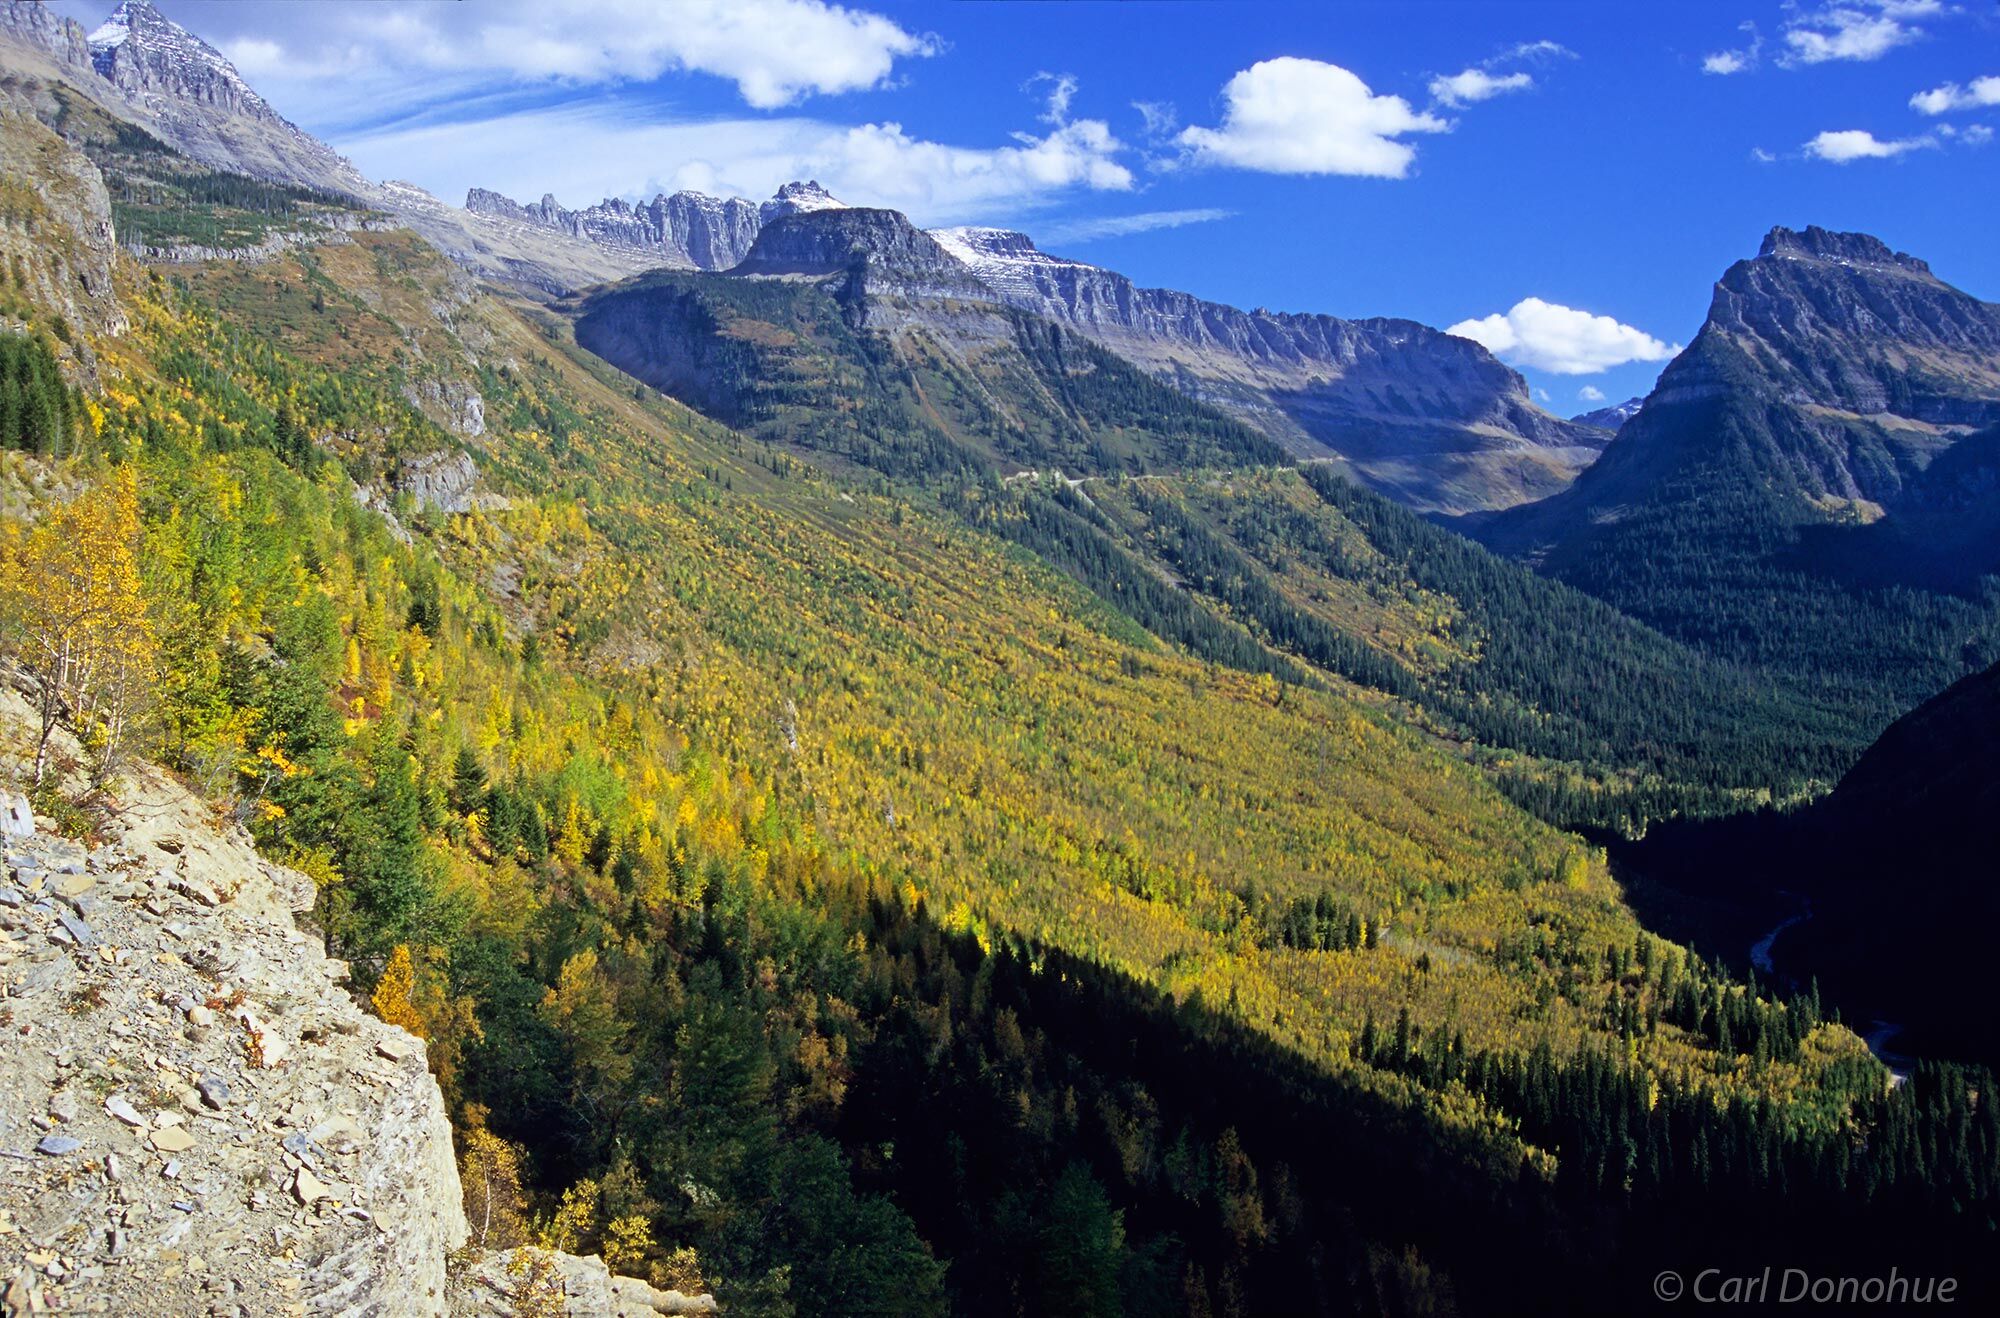 Fall colors on "Going to the Sun Road, Glacier National Park, Montana.